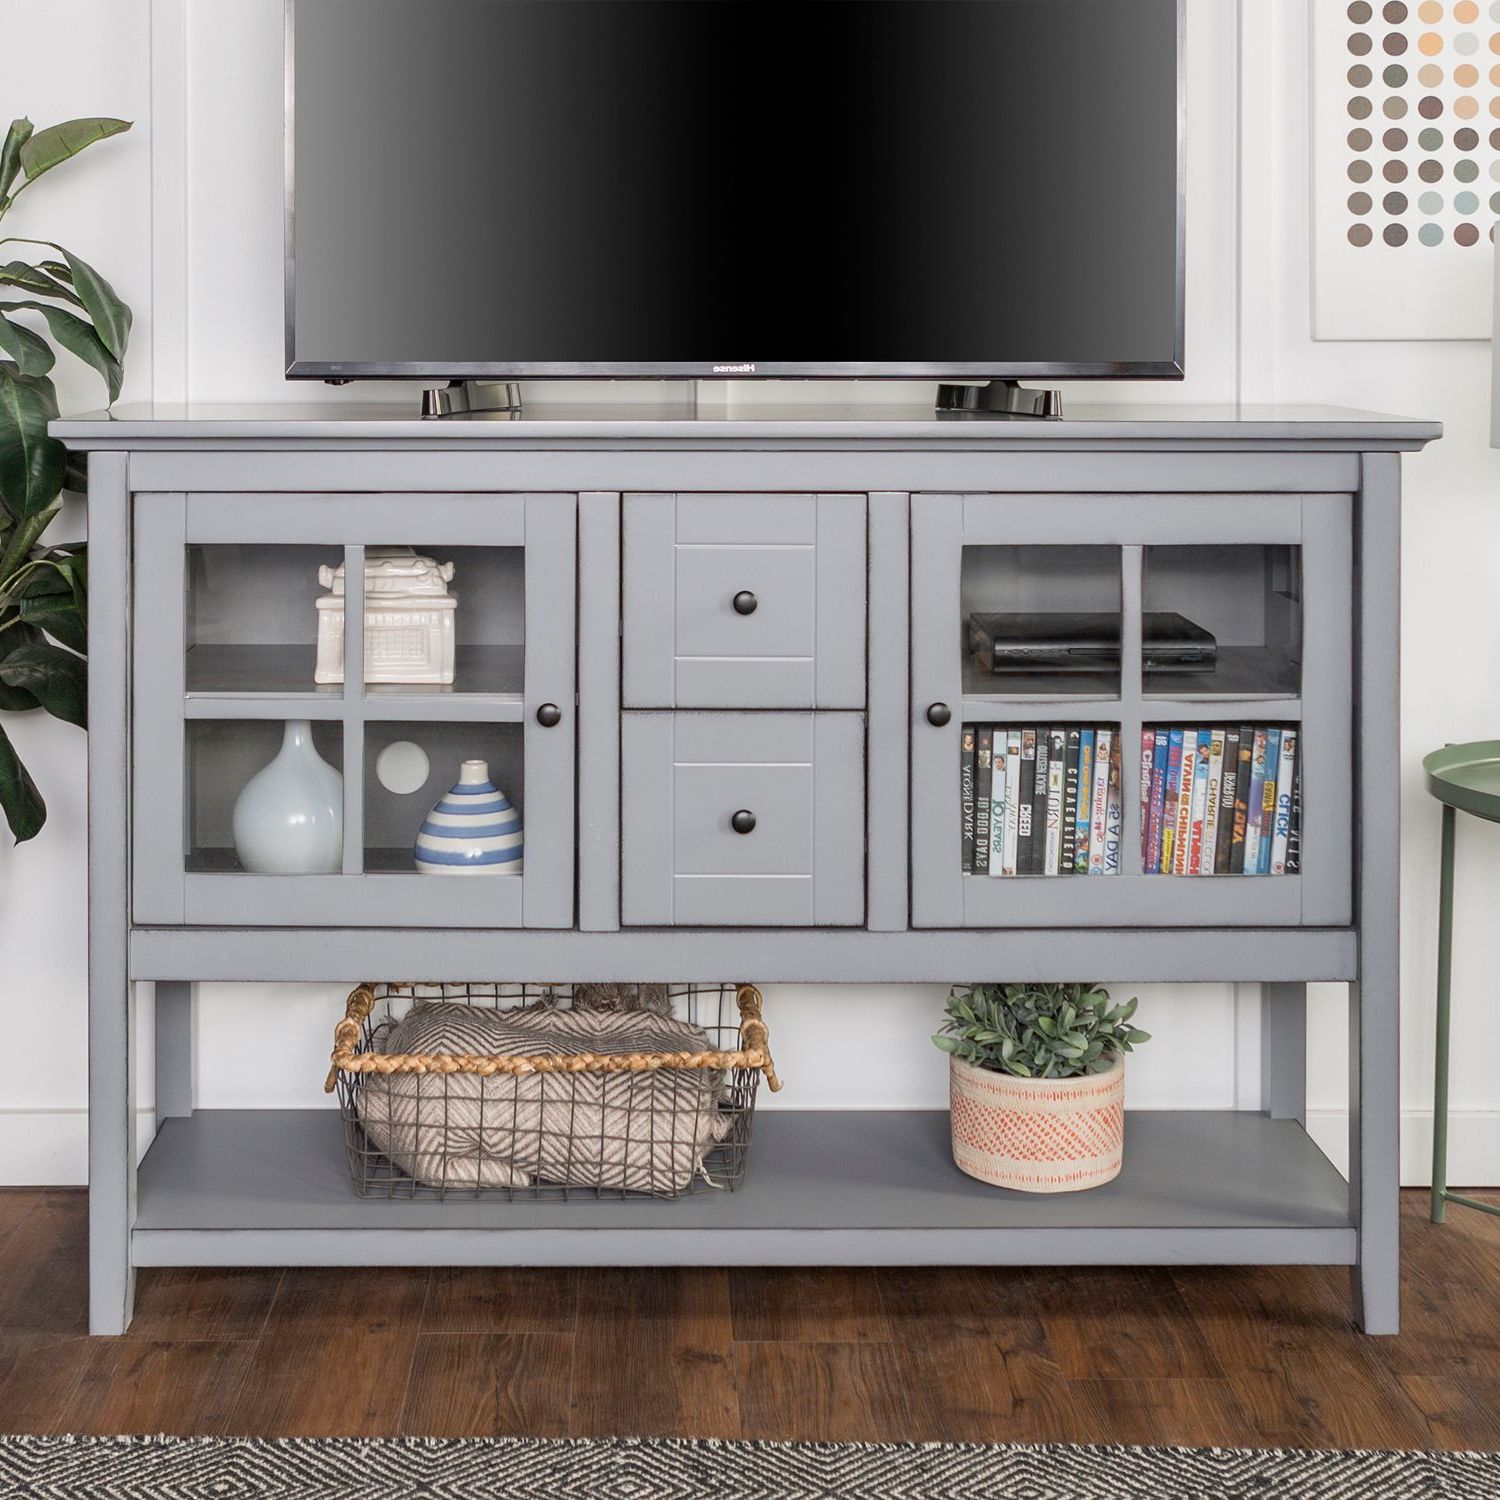 52" Antique Gray Tv Stand & Buffet | Living Room Tv Stand For Tv Stands With Table Storage Cabinet In Rustic Gray Wash (View 4 of 20)